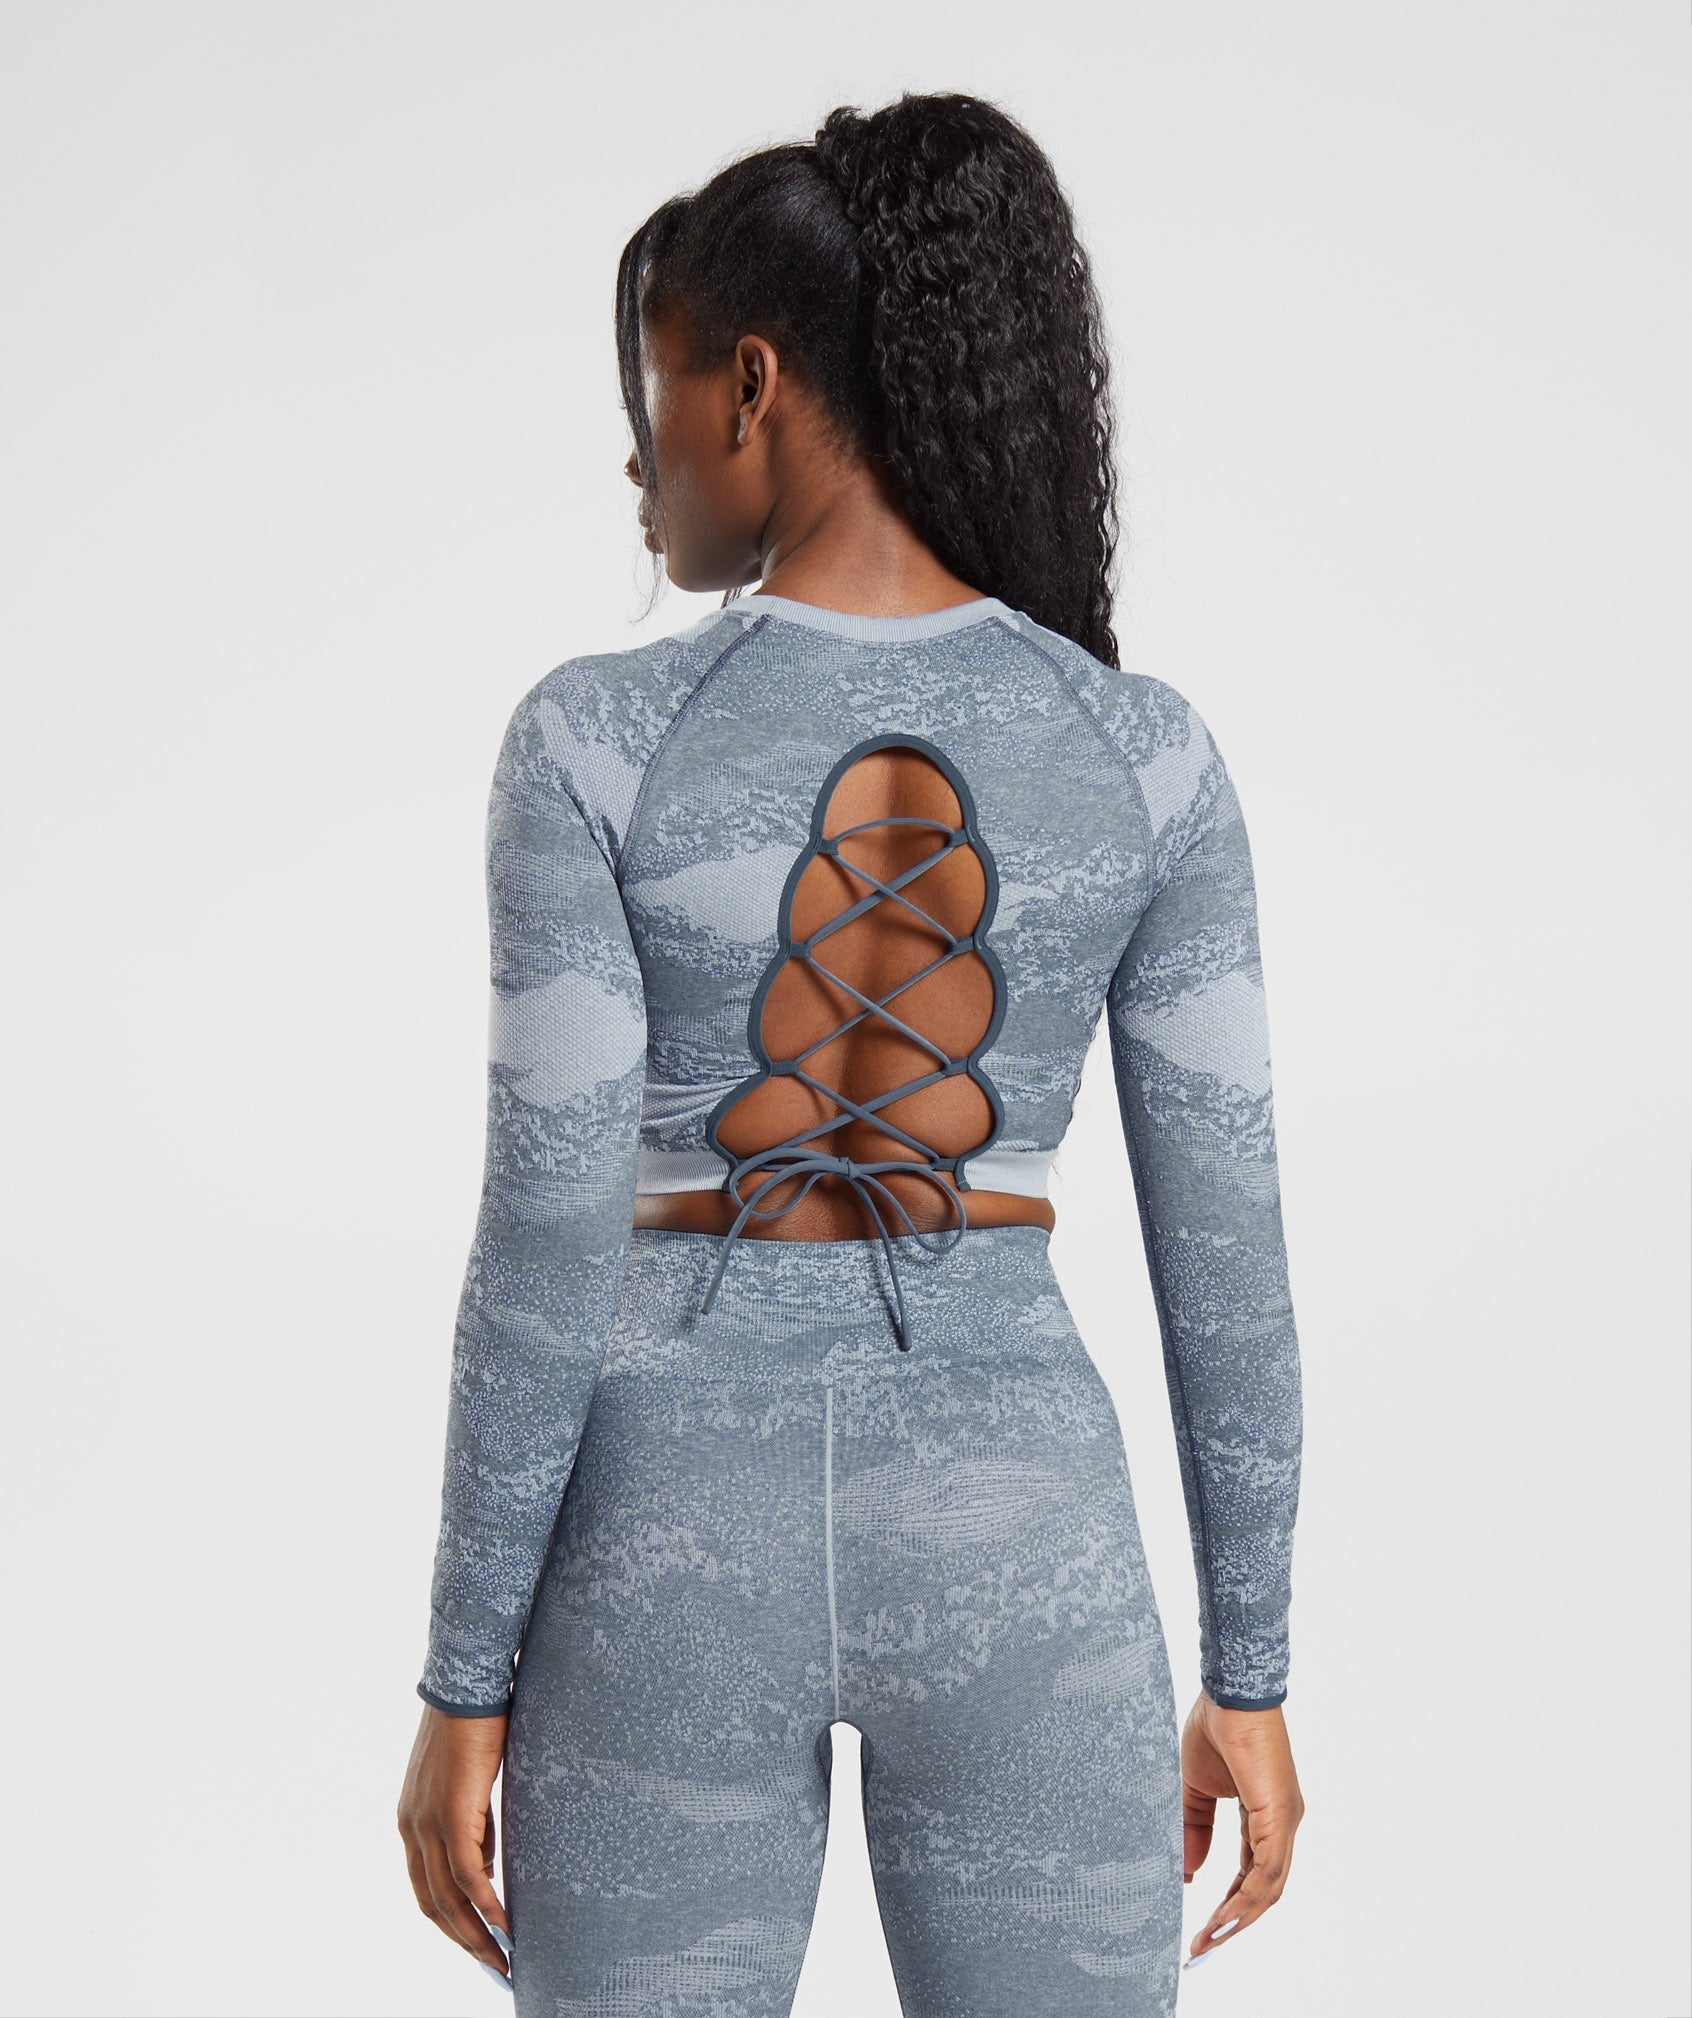 Adapt Camo Seamless Lace Up Back Top in River Stone Grey/Evening Blue